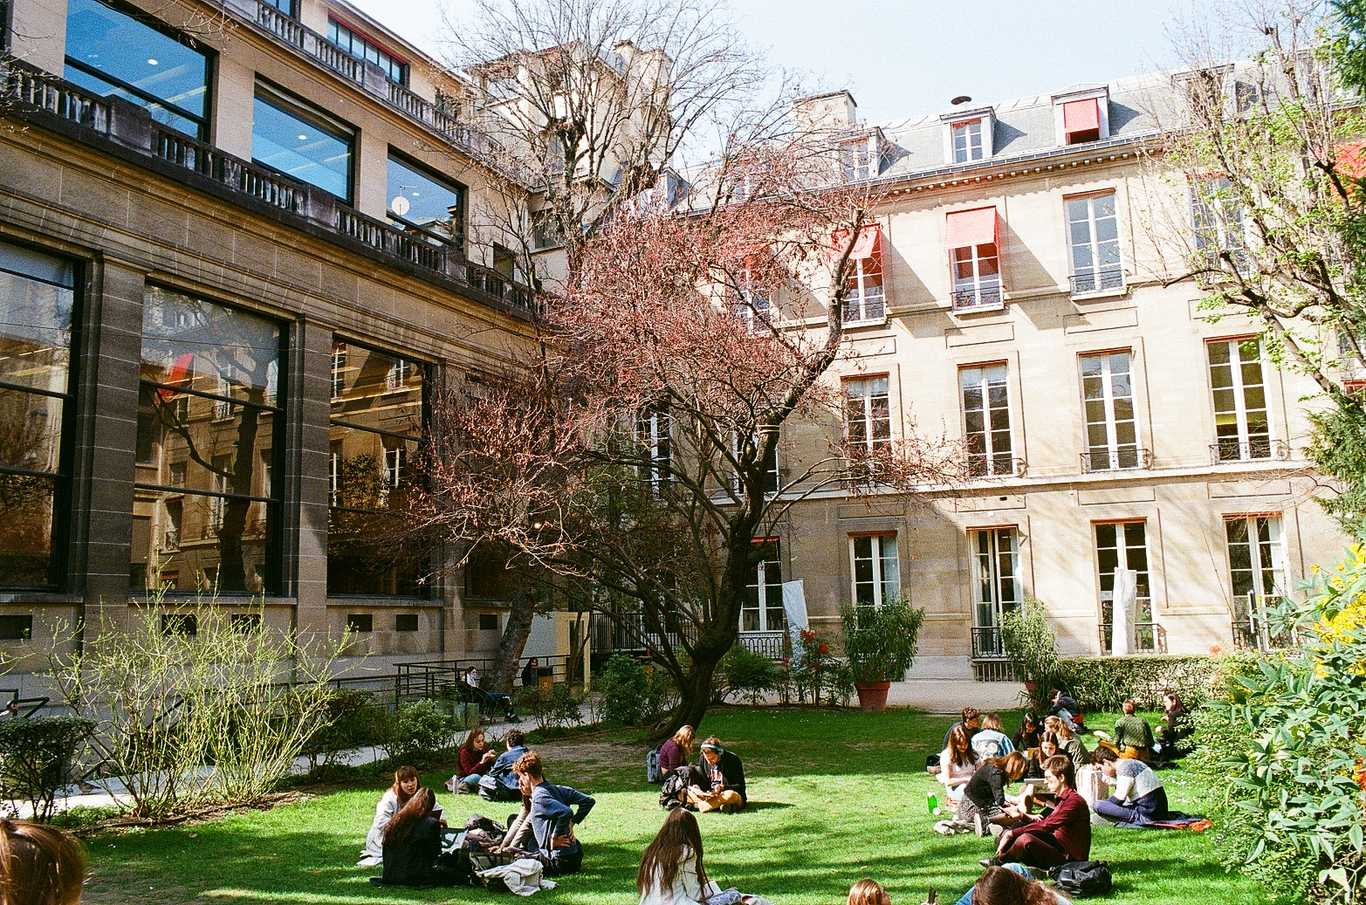 Students sitting on a lawn in a courtyard surrounded by French-style buildings